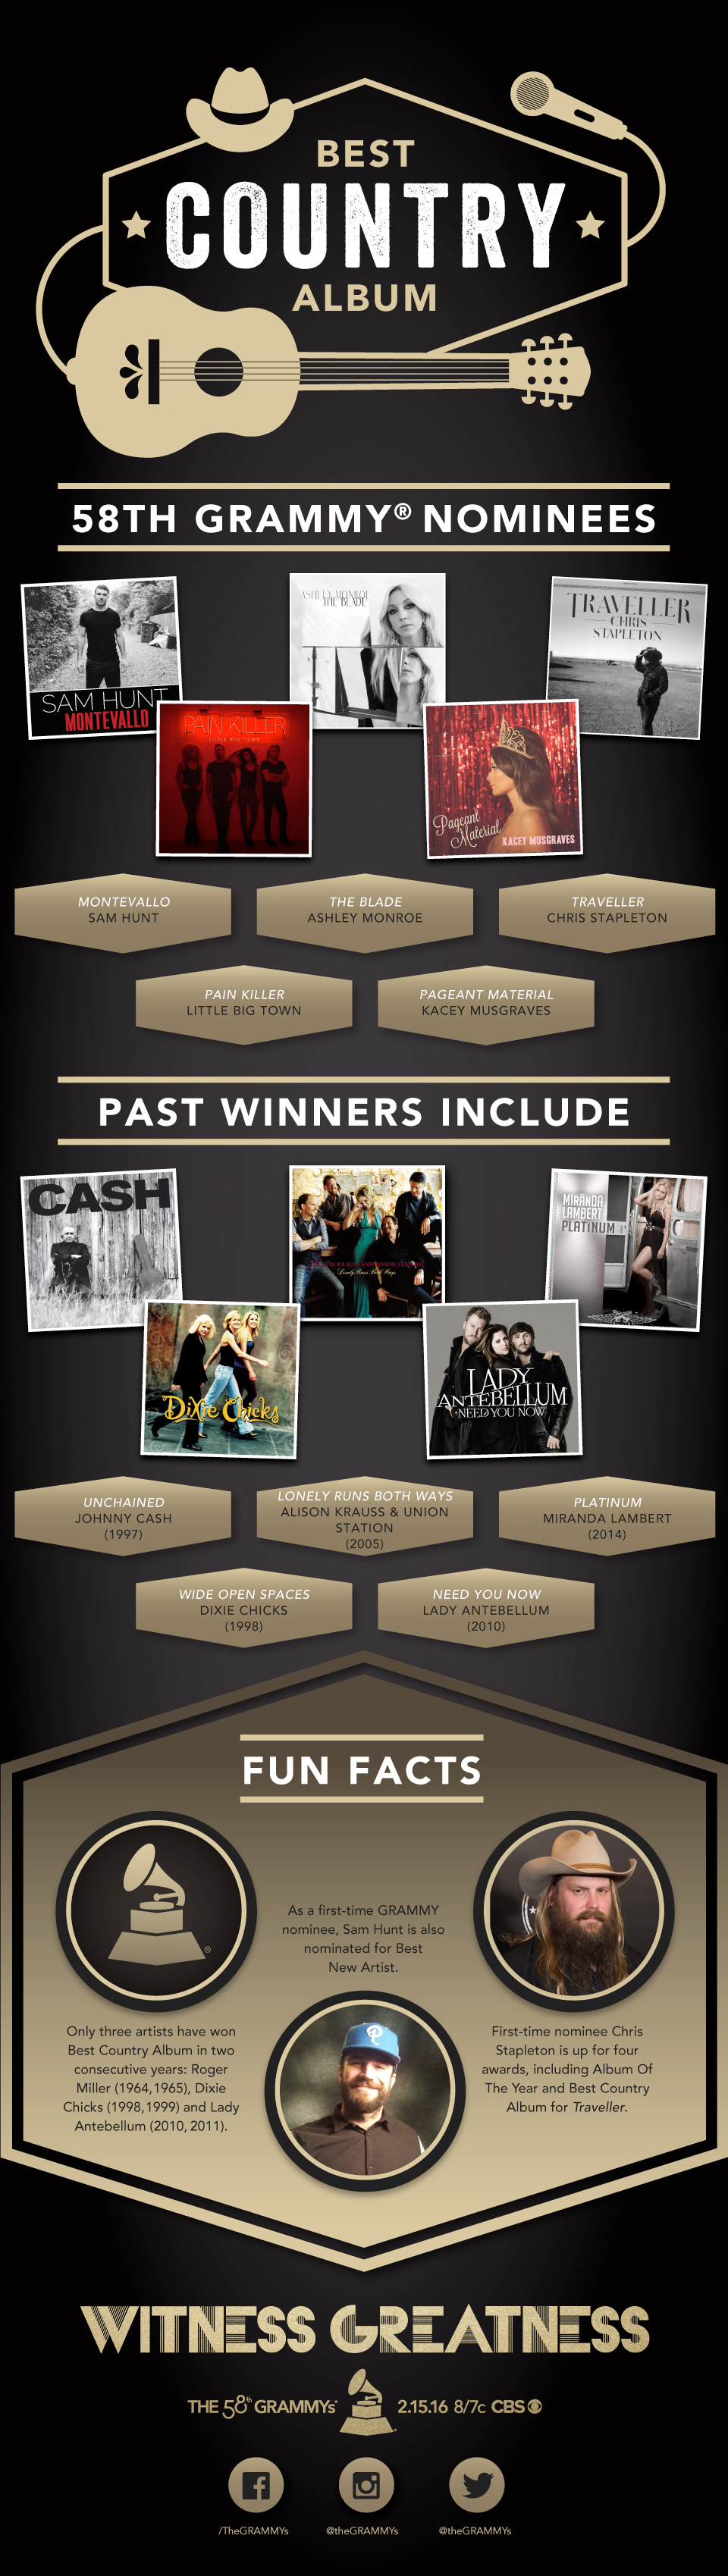 Best Country Album Meet the 58th GRAMMY Nominees Infographic